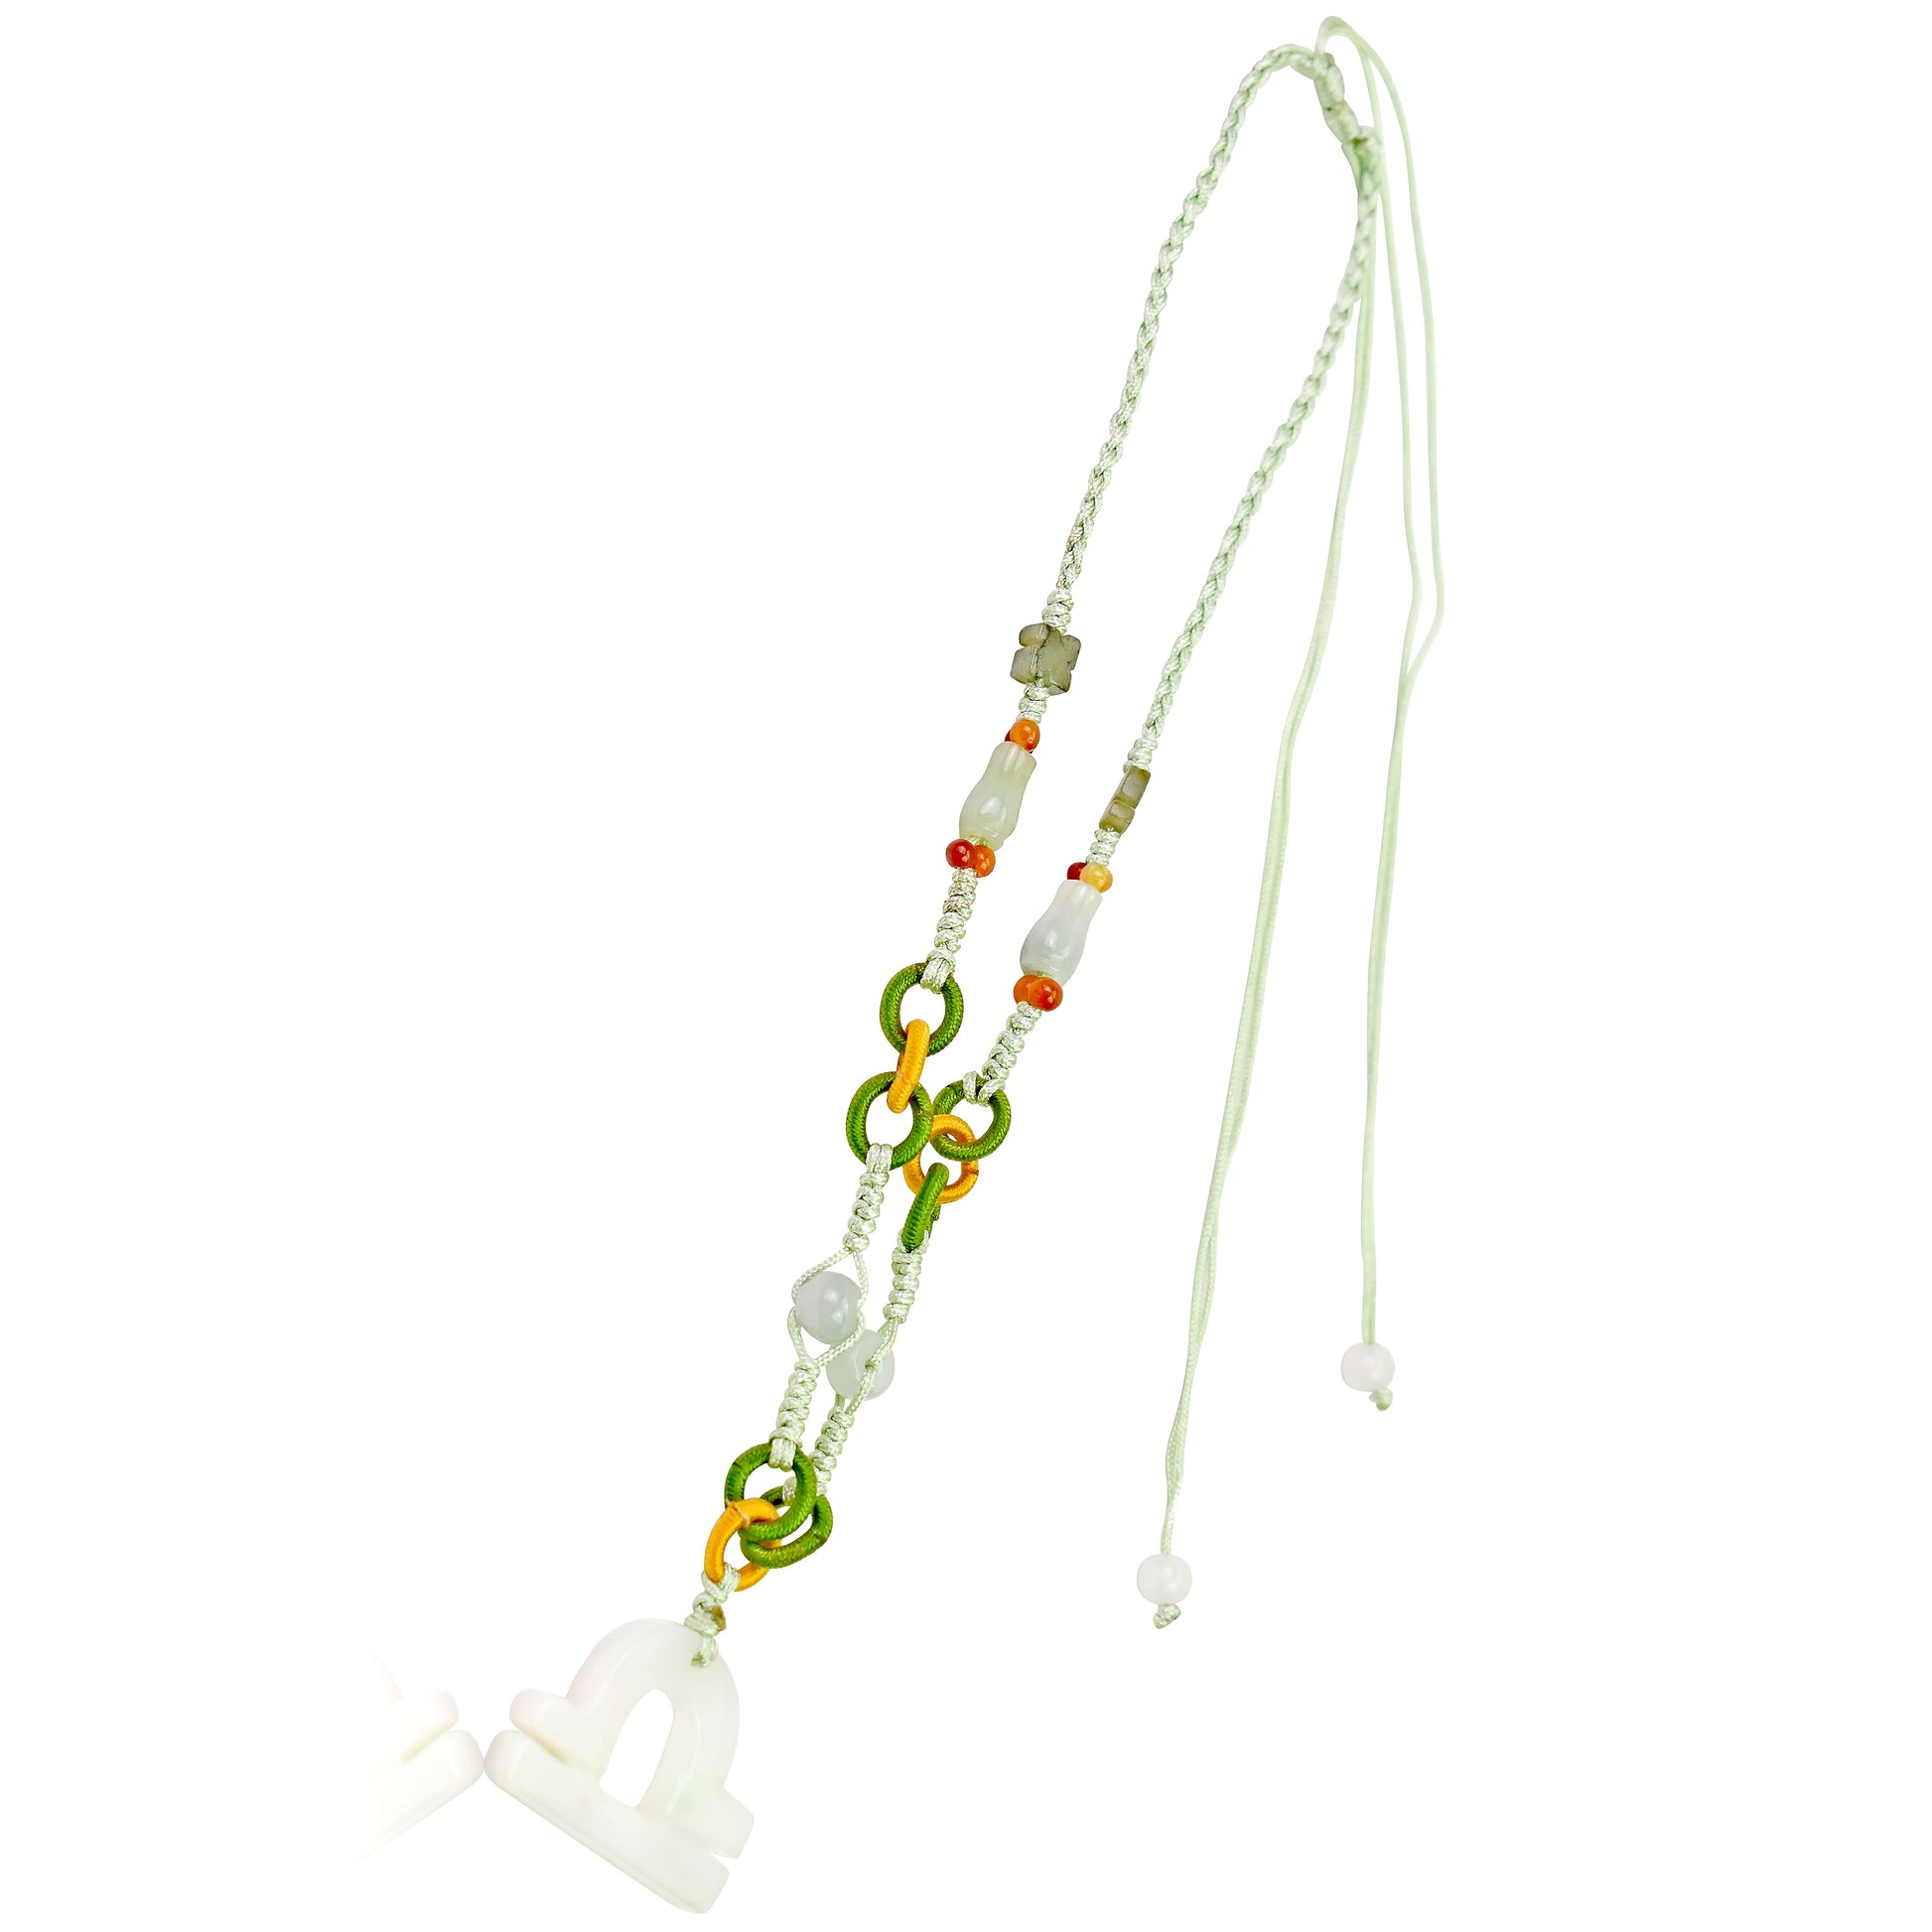 Get the Perfect Get the Perfect Gift for the Libra in Your Life with Jade Necklace made with Sea Green Cord